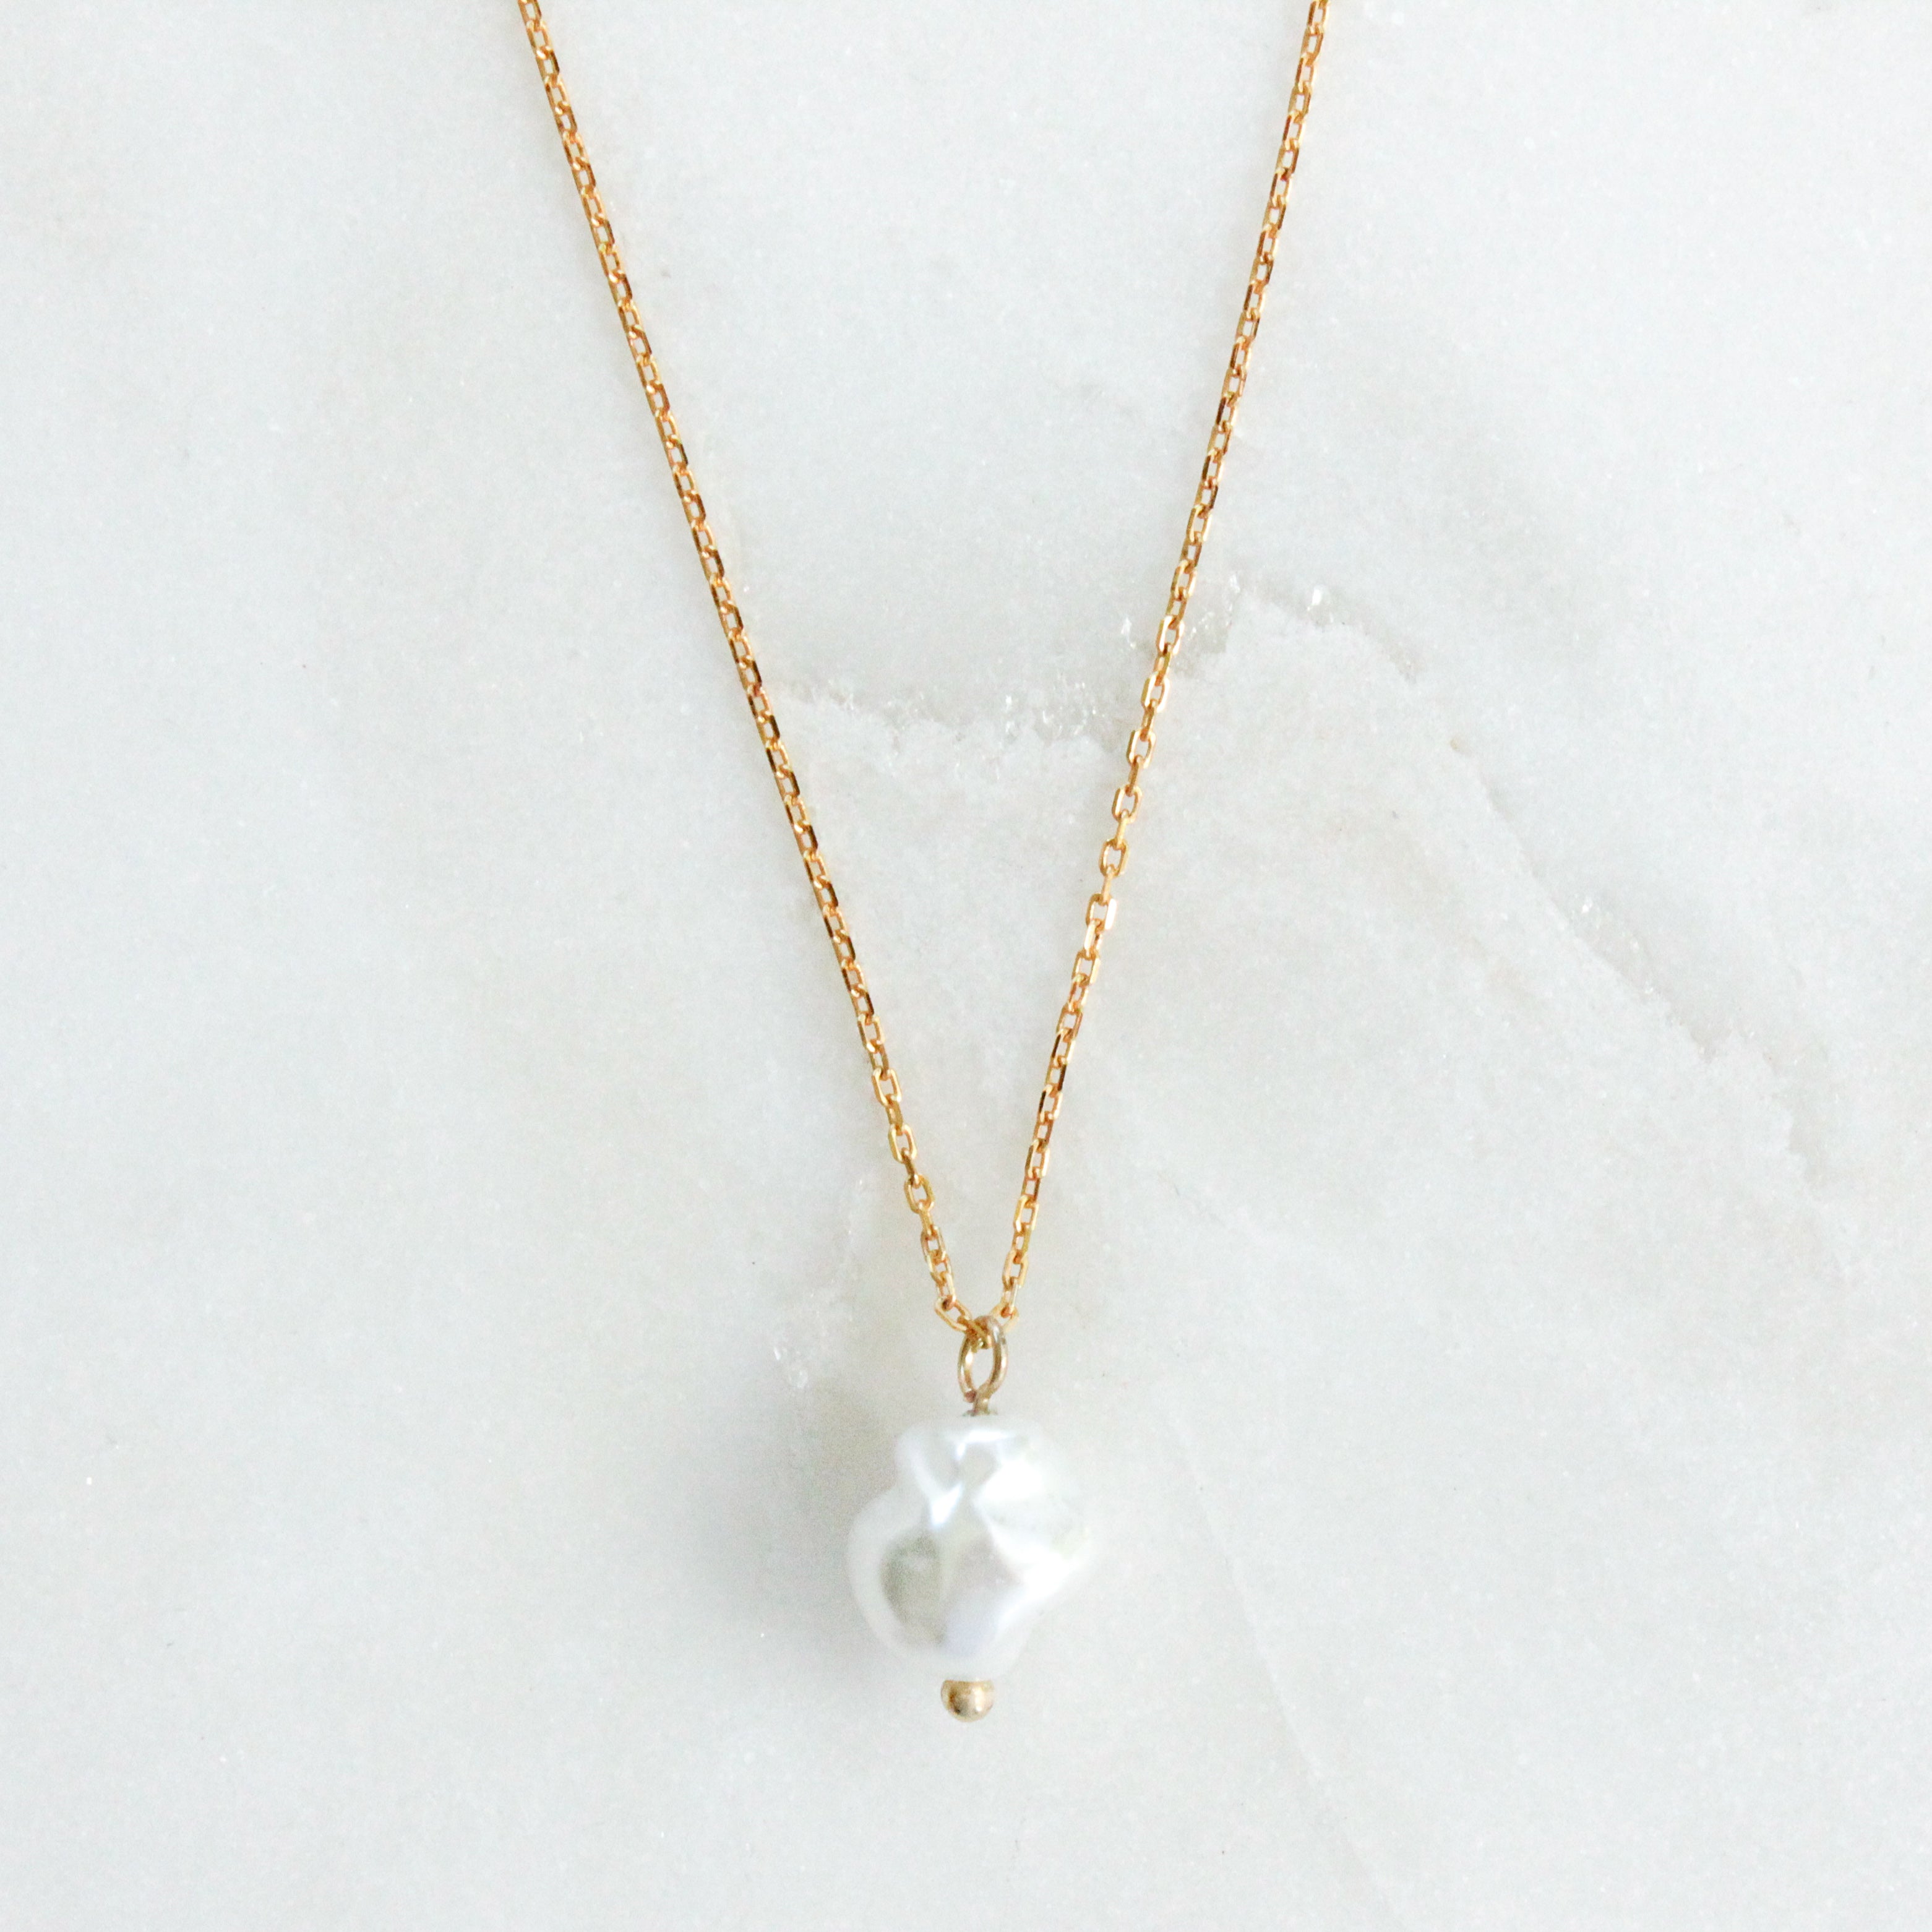 Candis Gold Dainty Pearl Drop Necklace Pendant